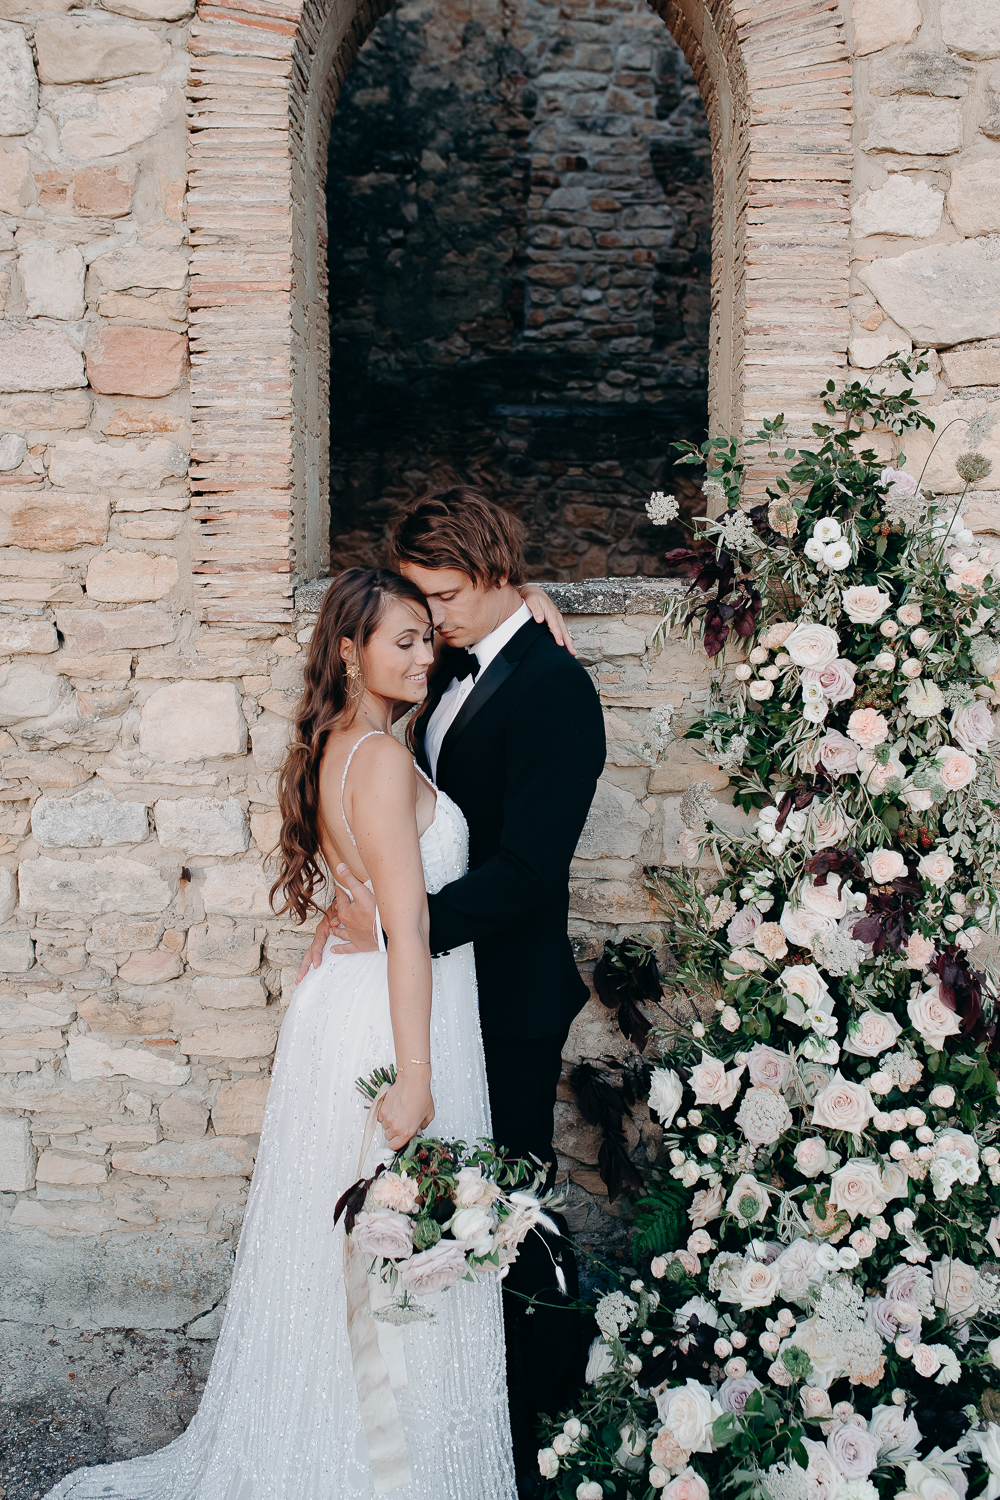 Mini Wedding in Provence "Al Fresco" • Crédits - Elise Morgan pour To the moon and back